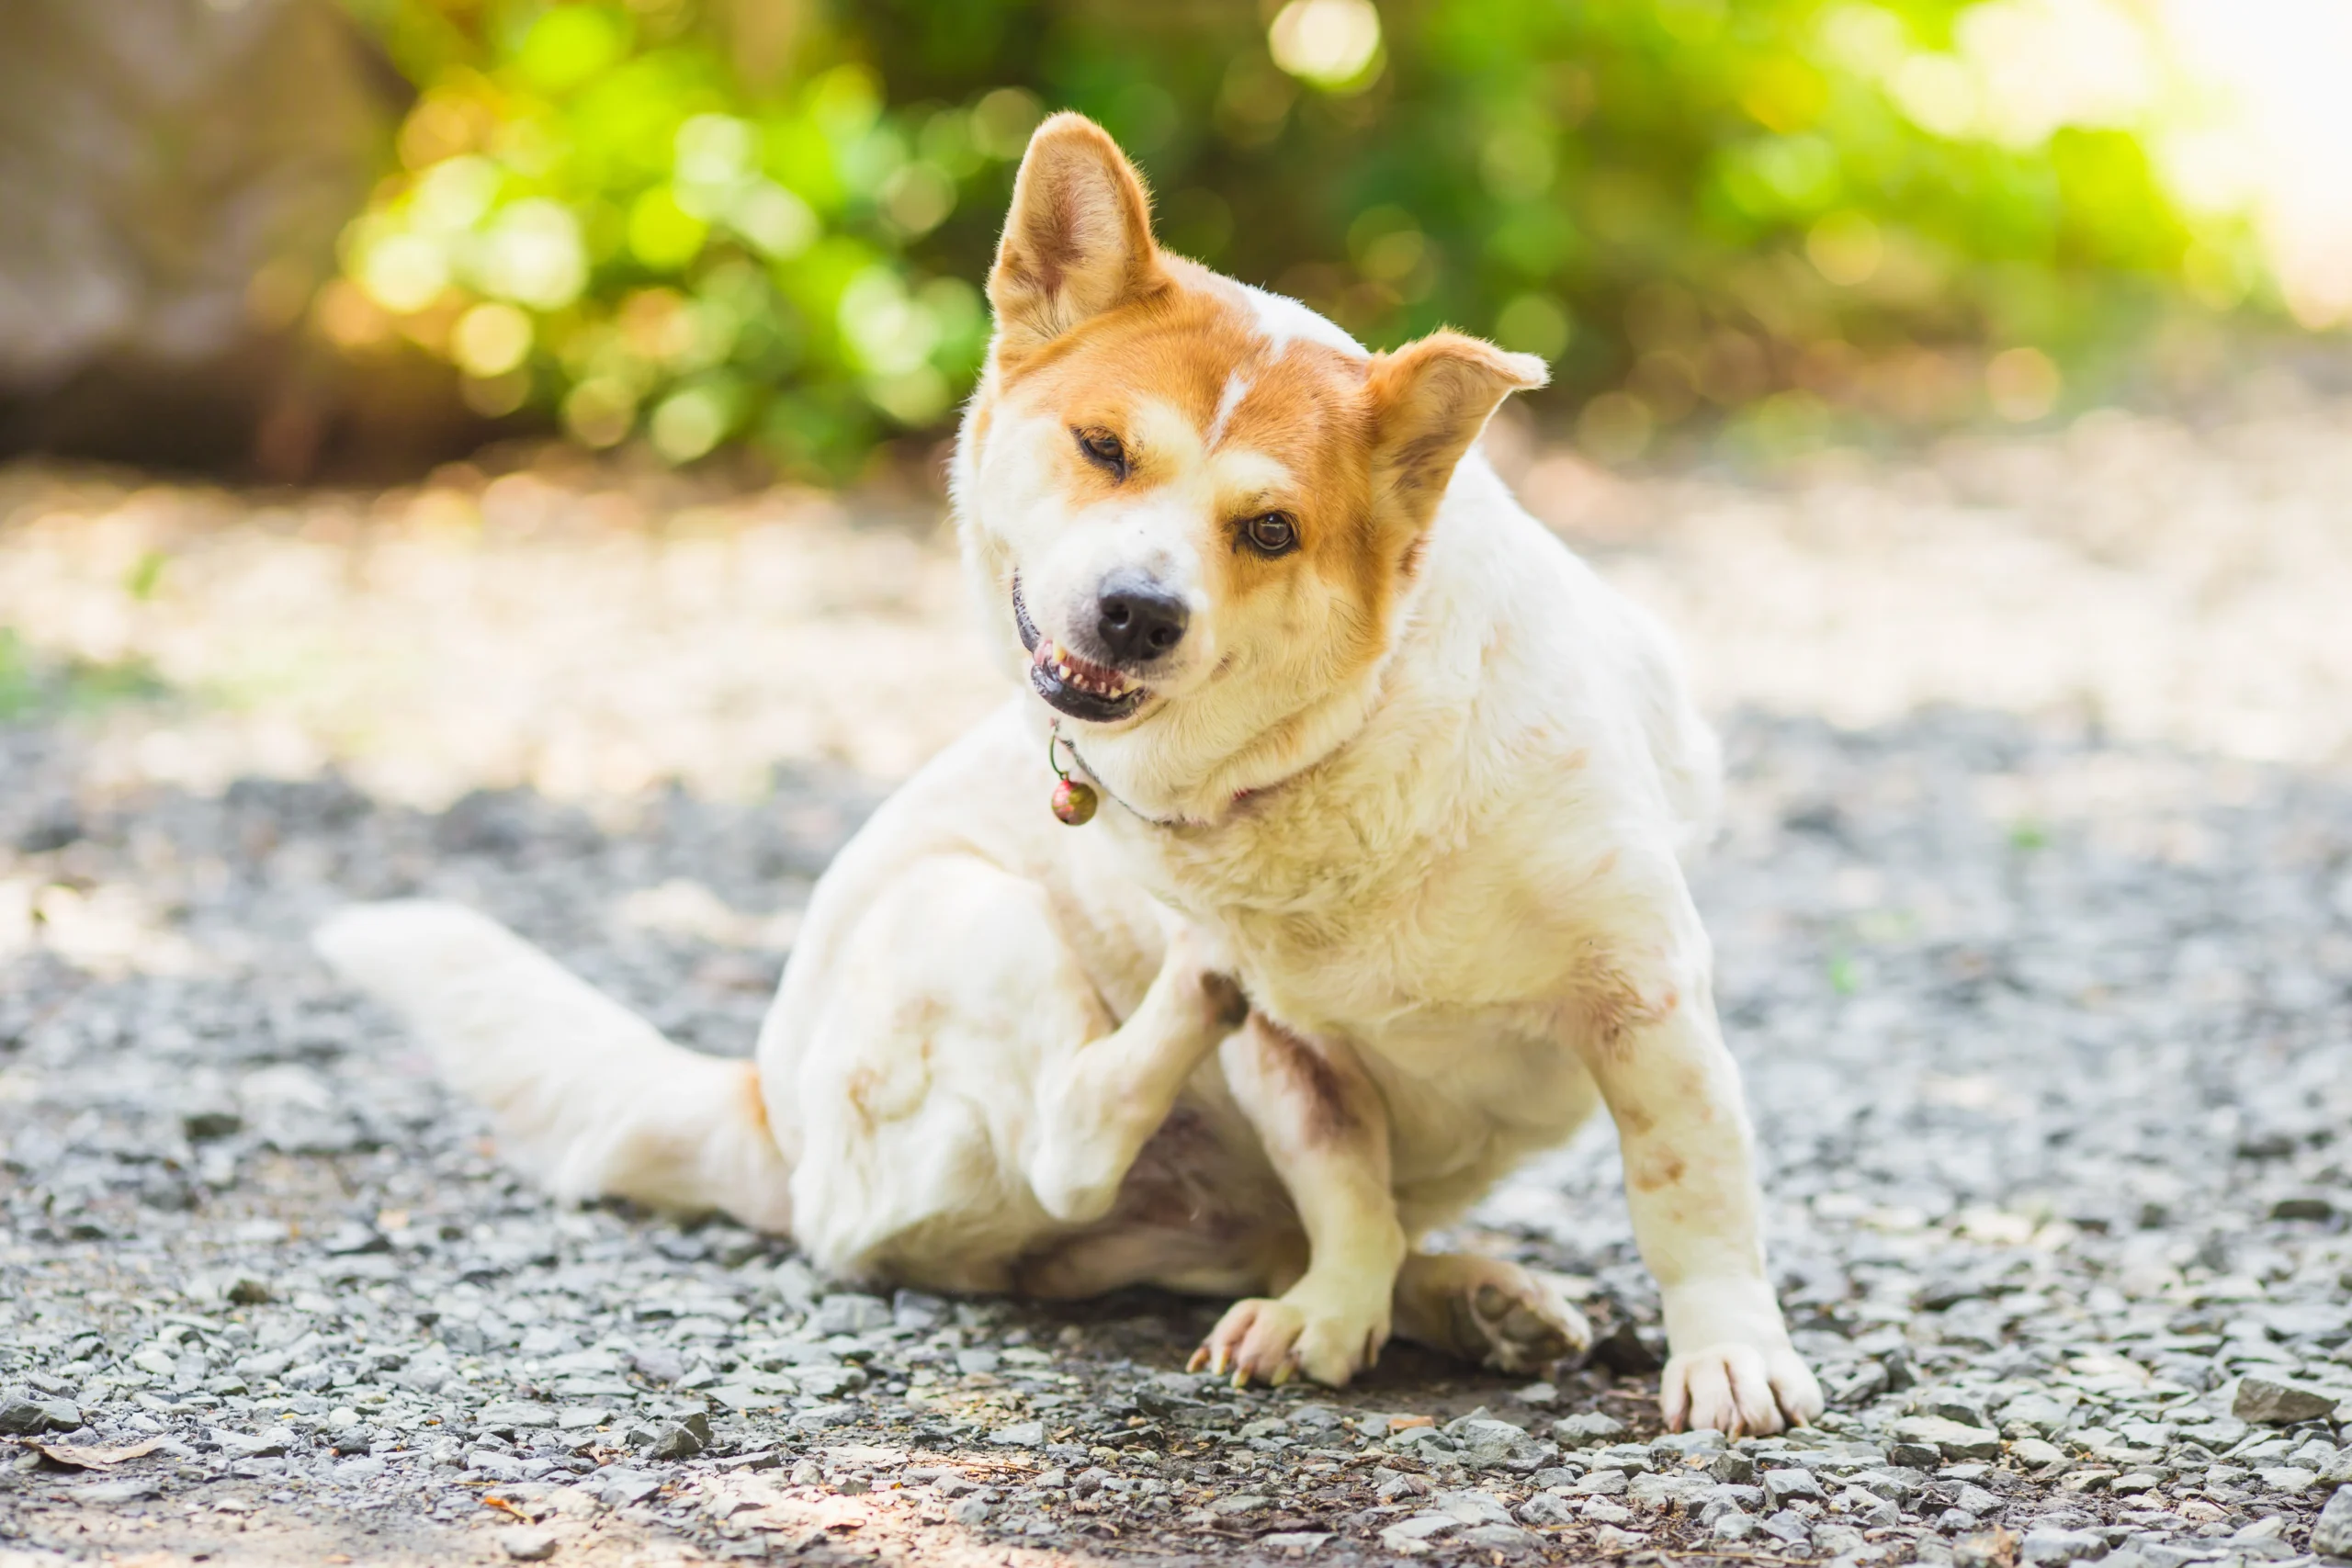 A Natural Approach to Managing Canine Allergies